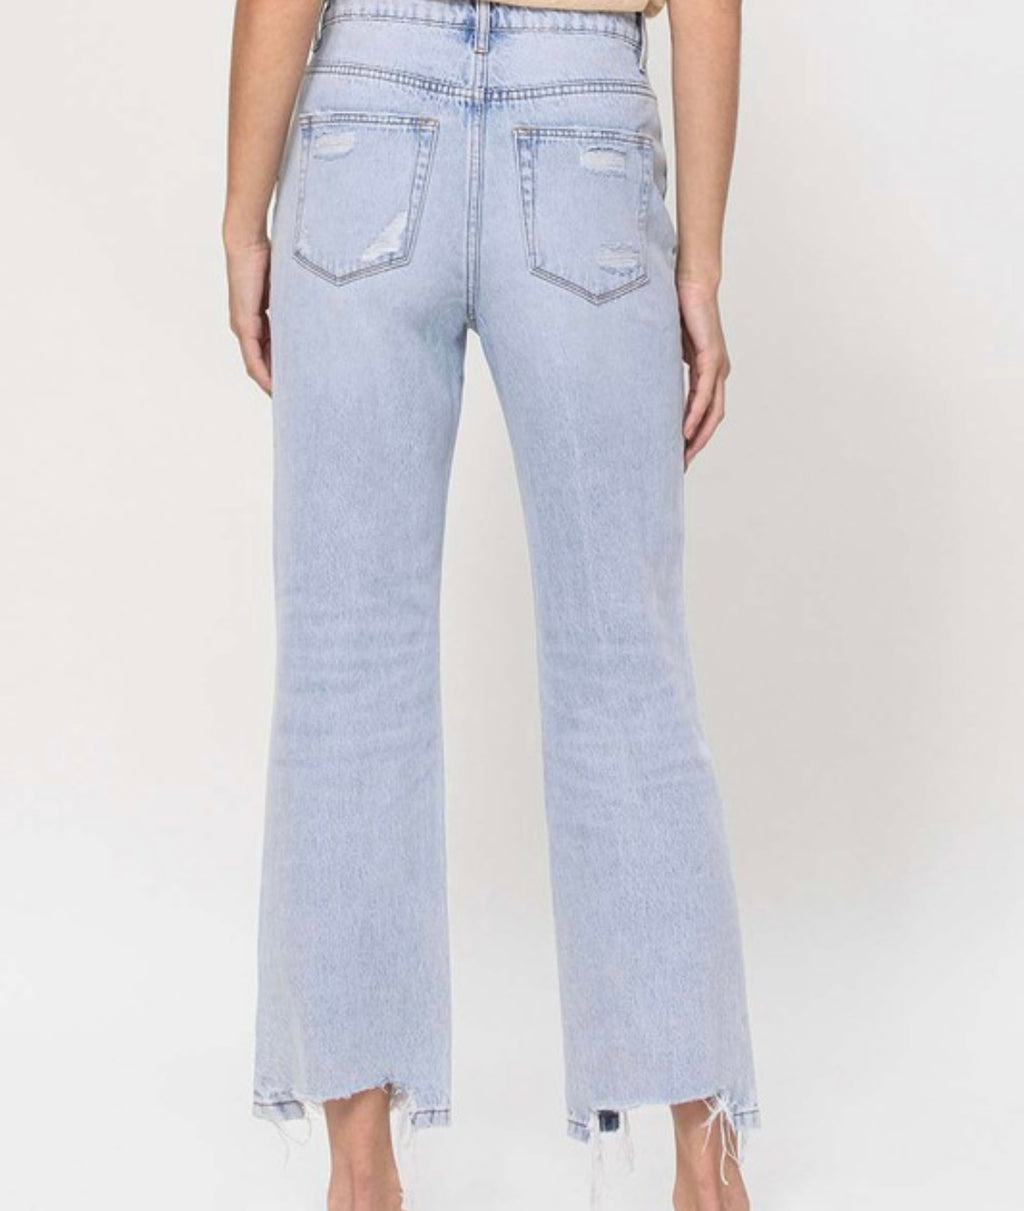 90’s Vintage Relaxed Crop Jeans